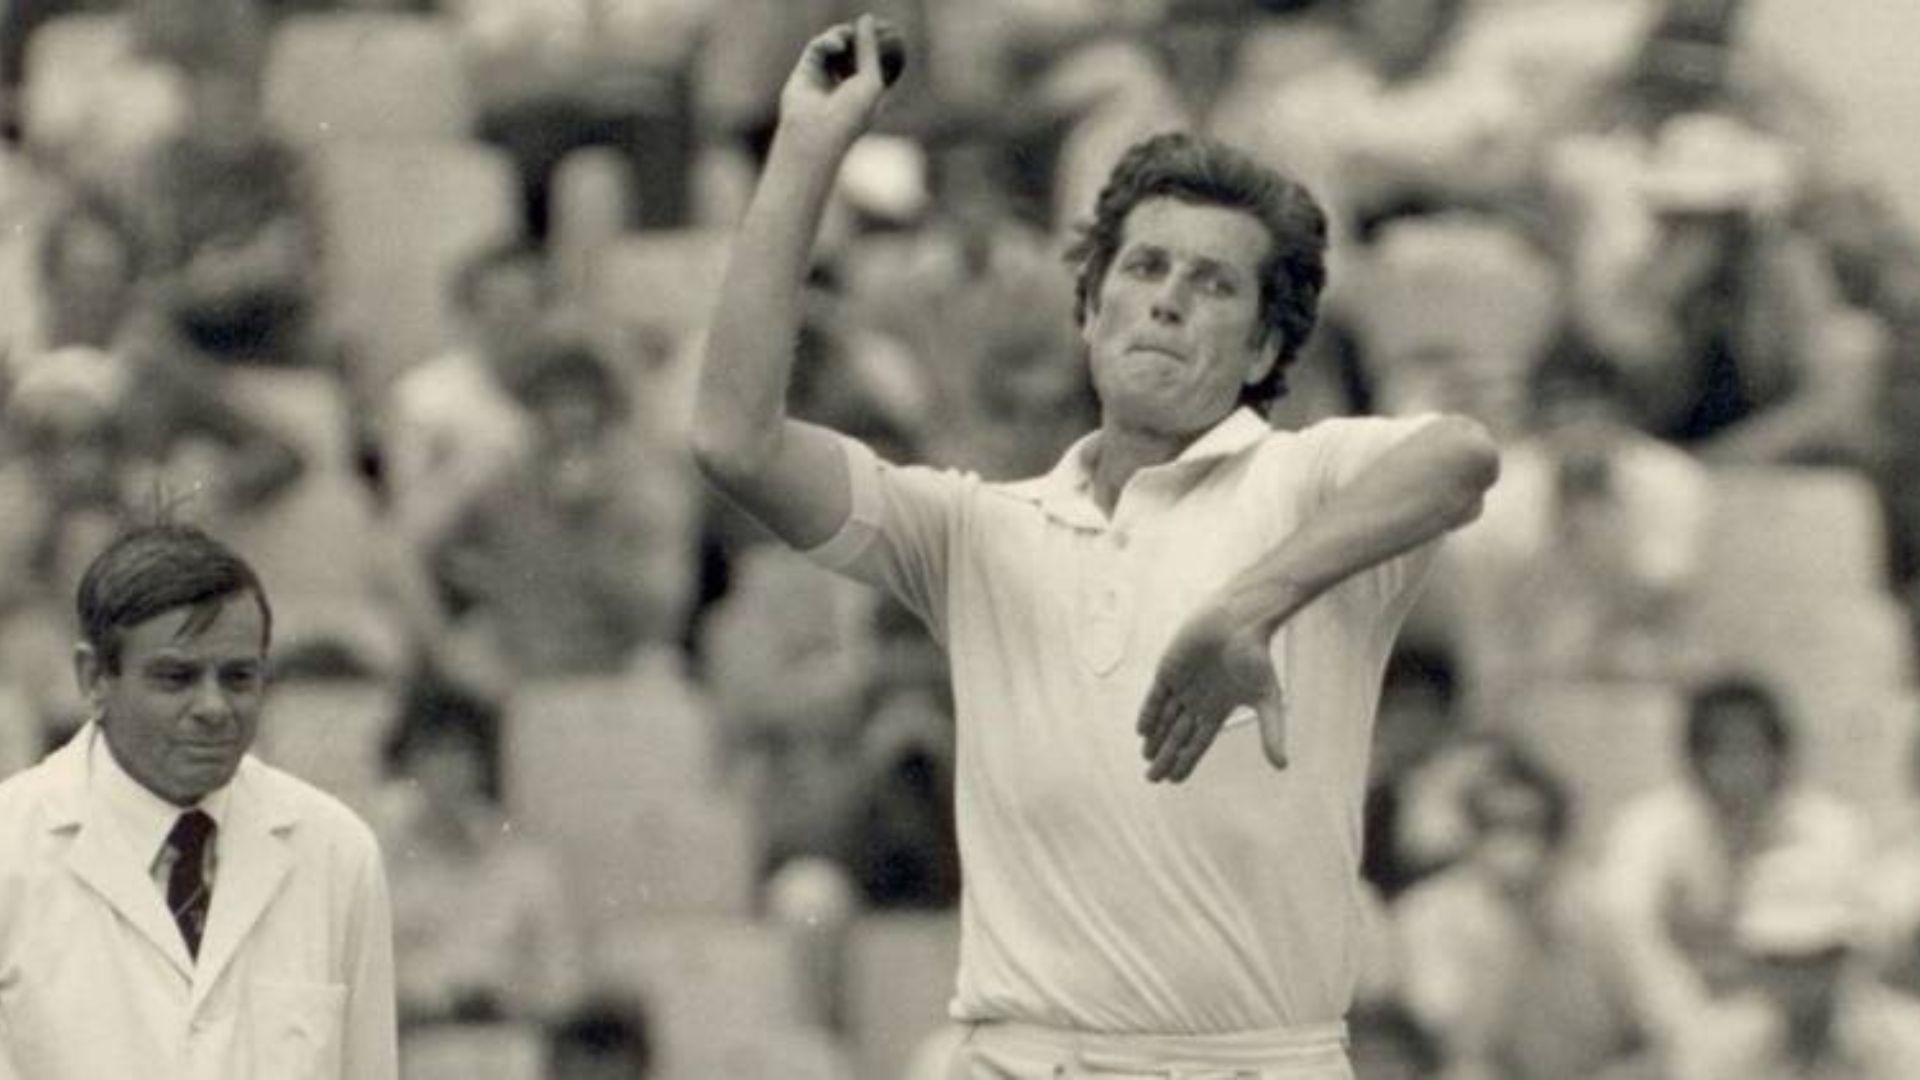 Bob Willis retired from Test cricket in 1984.